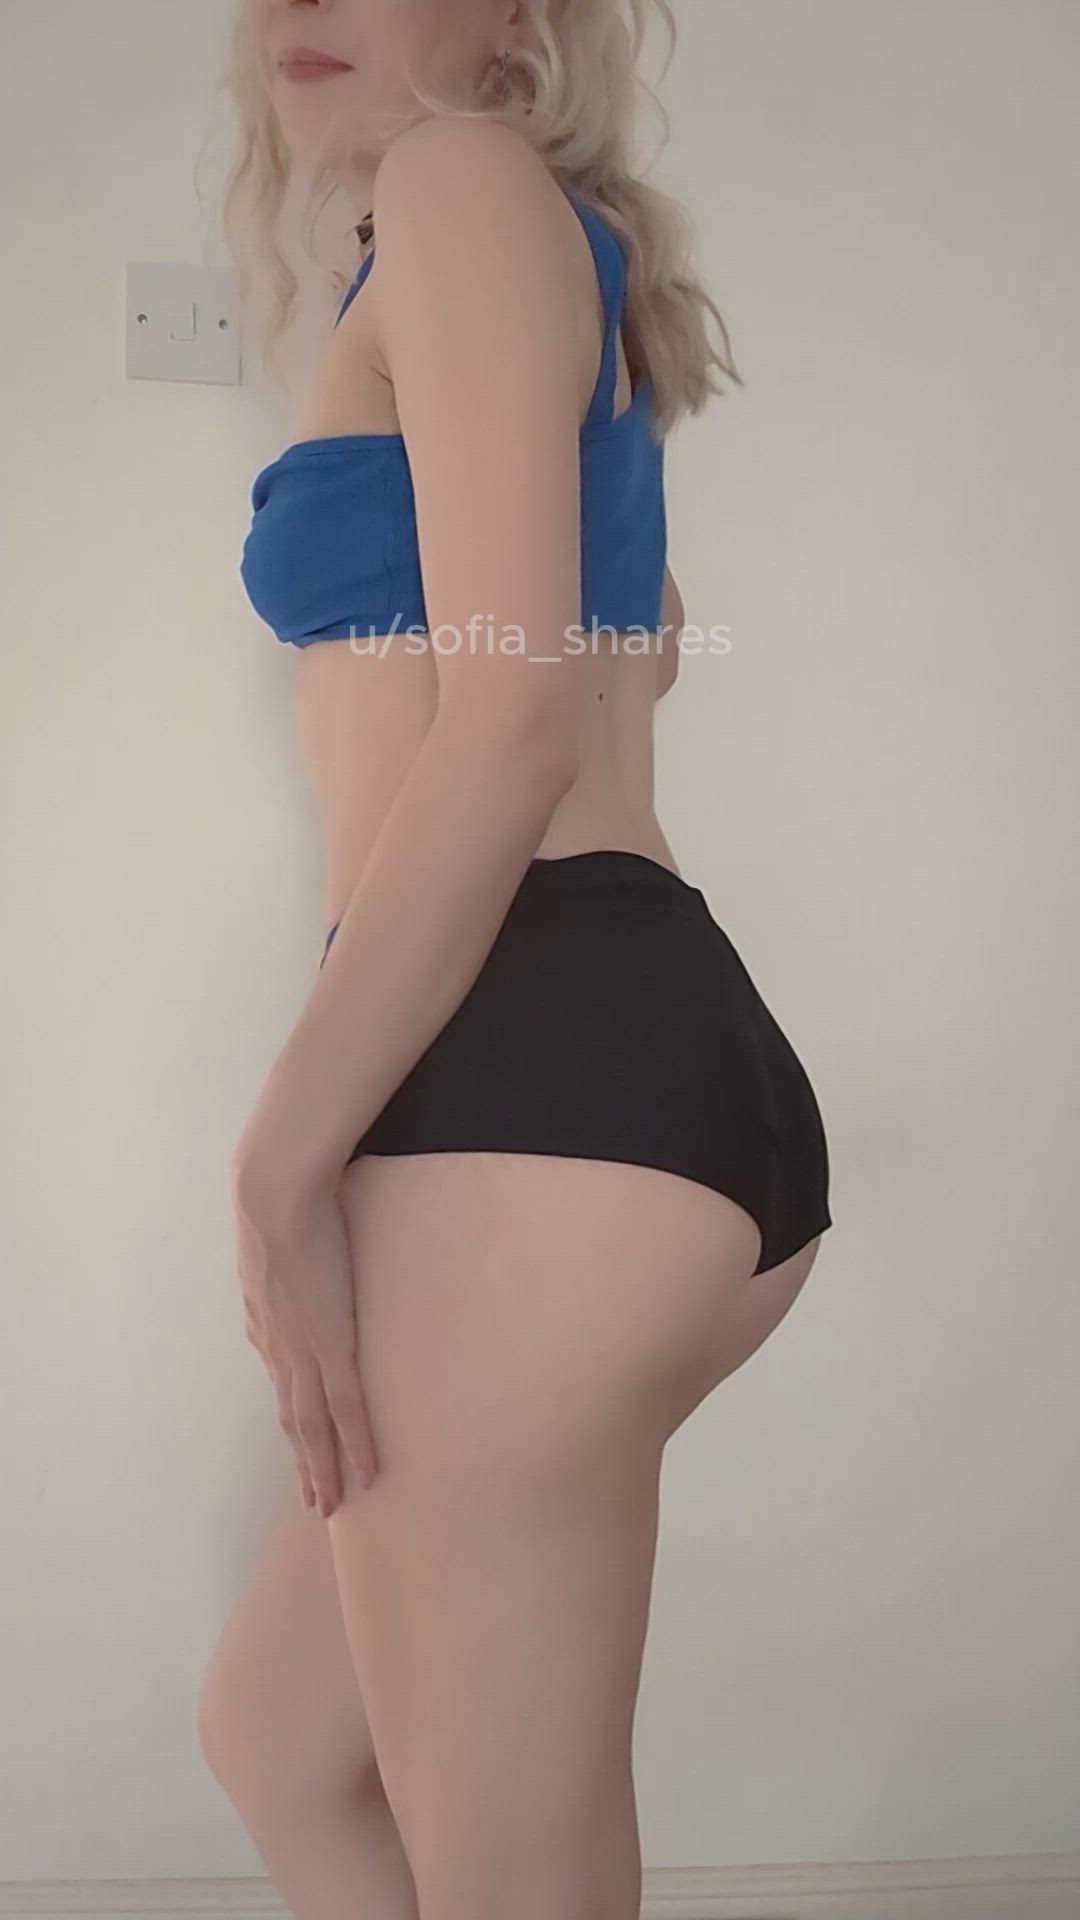 Ass porn video with onlyfans model sofiashares <strong>@sofia_shares</strong>